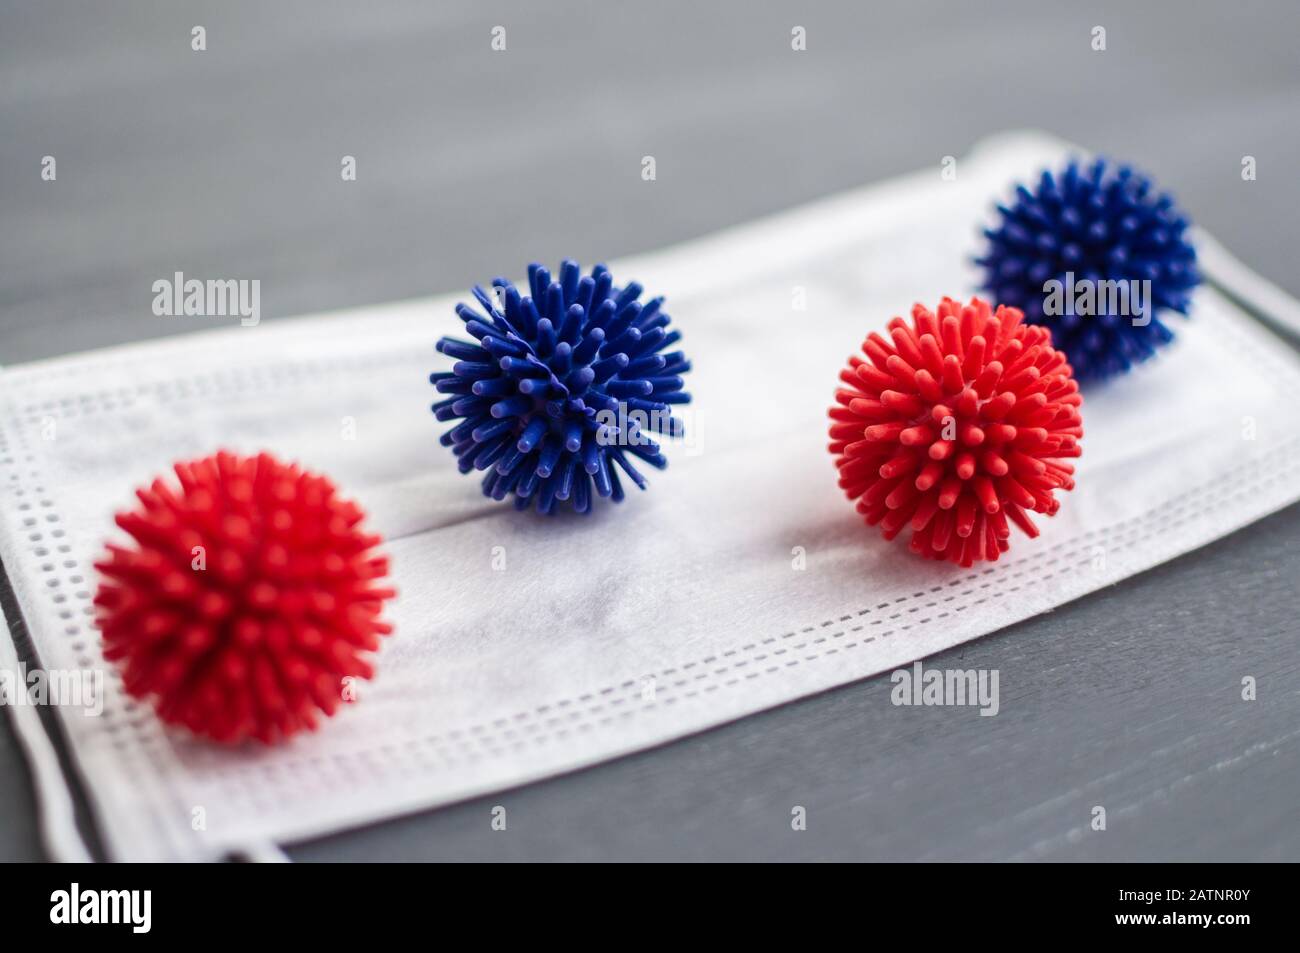 Abstract coronavirus strain model from Wuhan, China. Outbreak Respiratory syndrome and Novel coronavirus 2019-nCoV with free space on grey background. Stock Photo